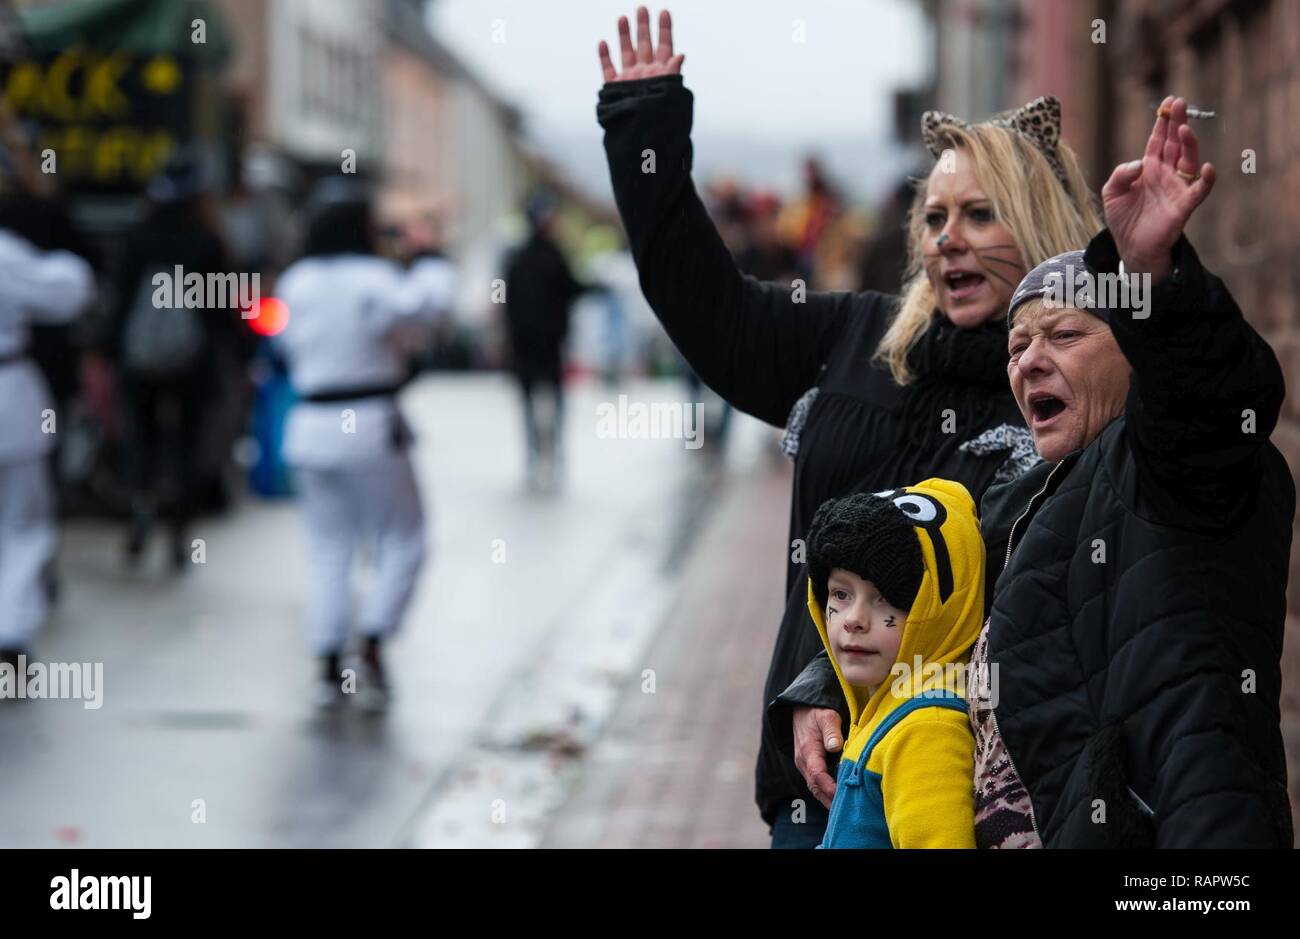 People wave at people in a parade during fasching, a festival held across Europe, in the city of Ramstein, Germany, Feb. 28, 2017. In the Middle Ages, Karneval gave people a break from the tightly structured class system, as they were able to hide their social background behind imaginative costumes and masks. Stock Photo